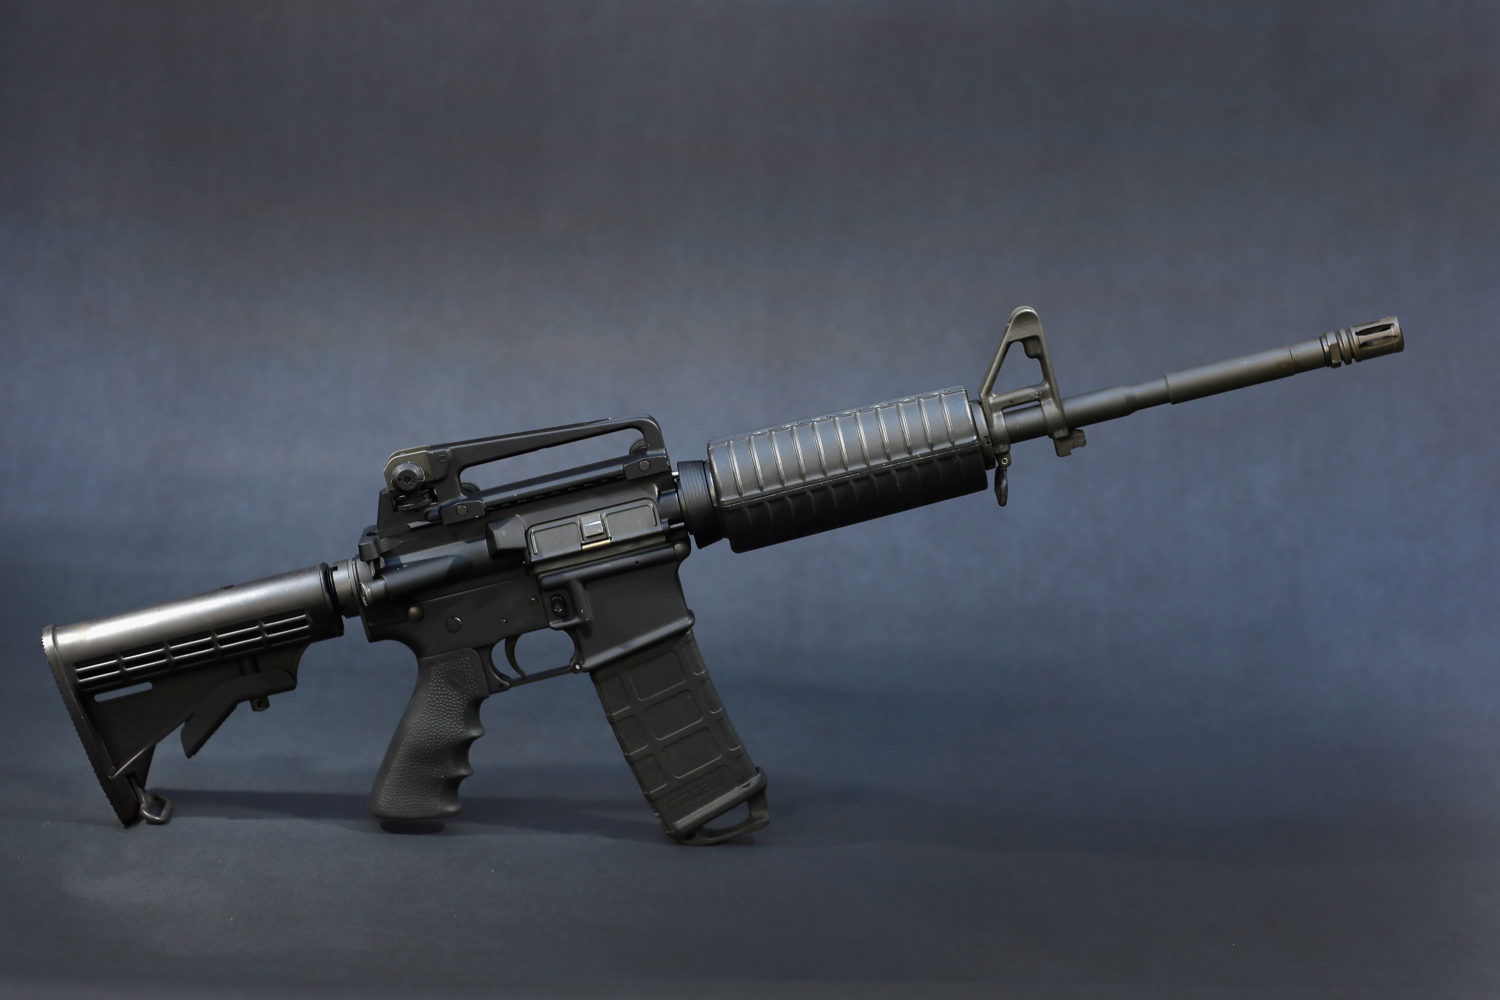 Why An AR-15 For Home Defense